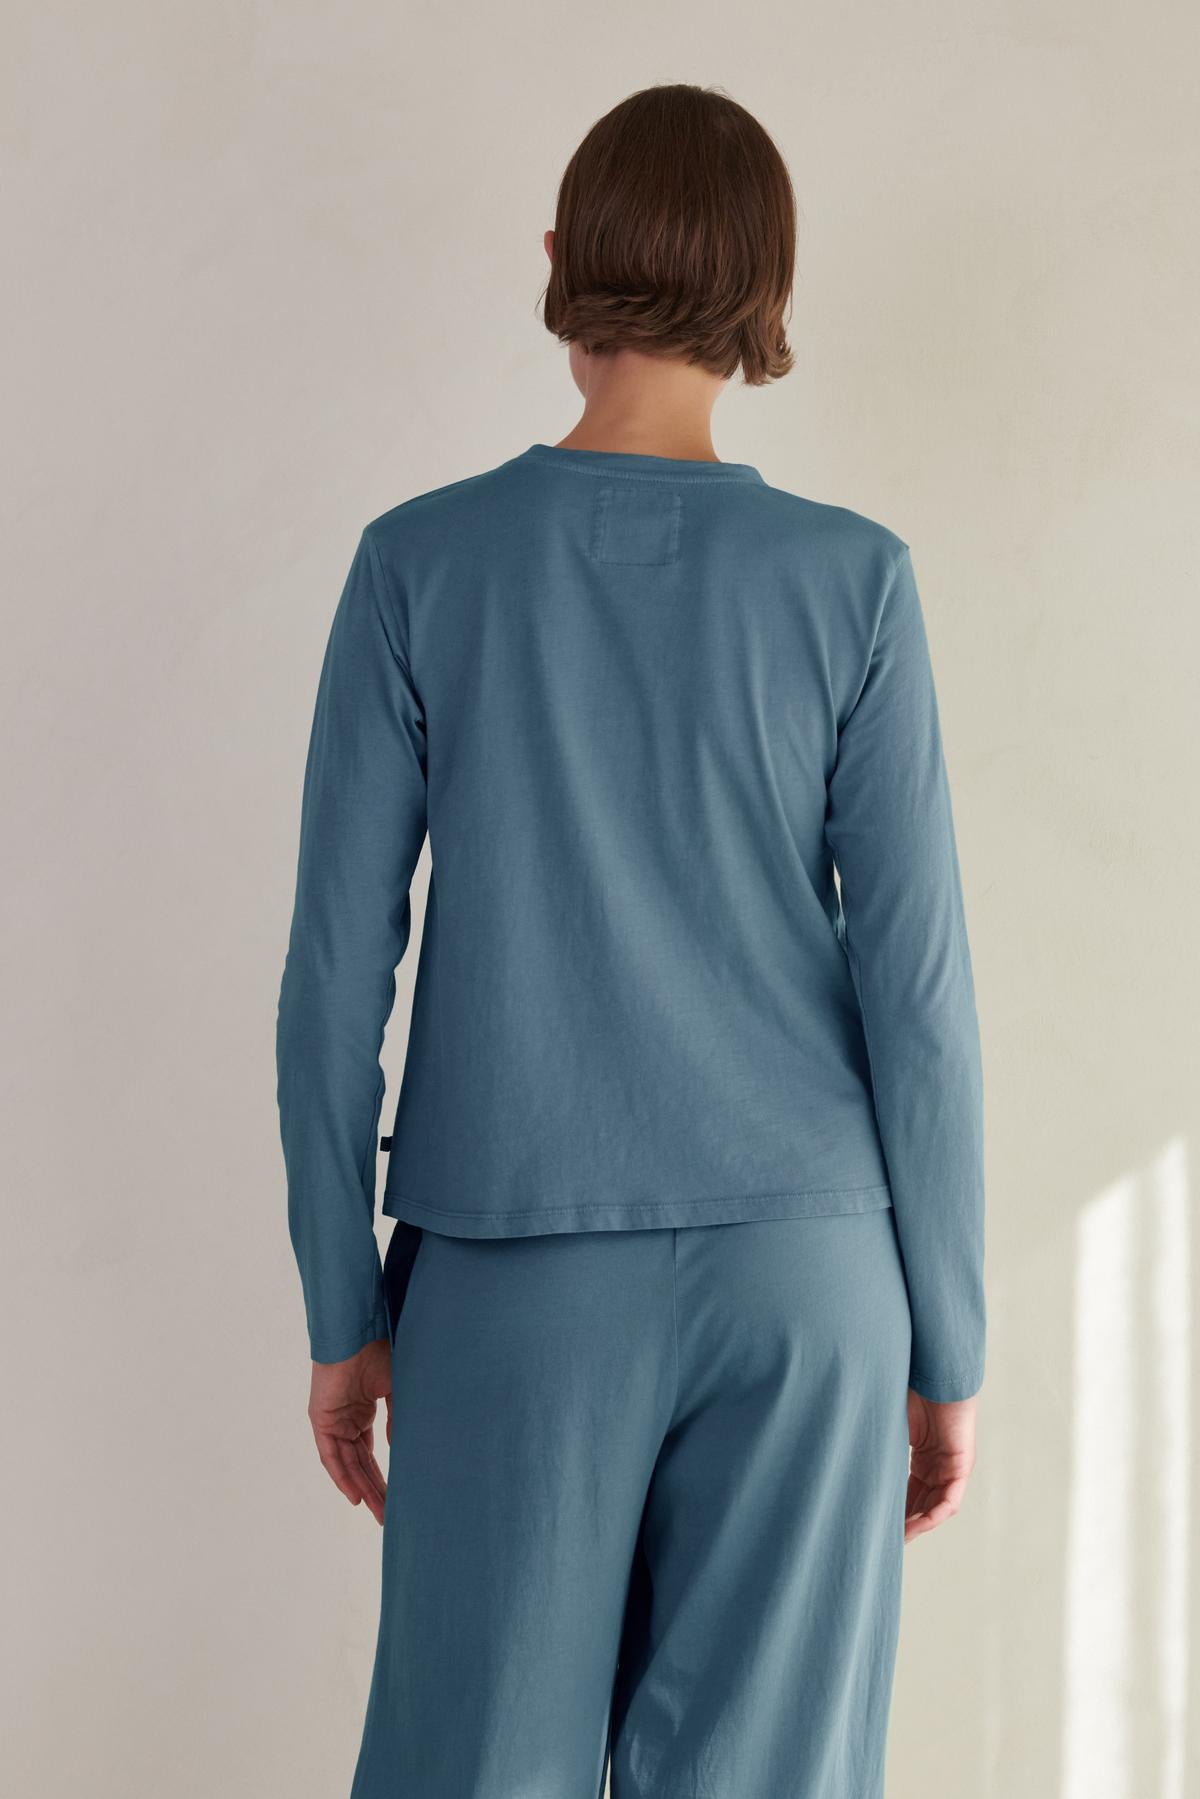 The woman is wearing a relaxed fit blue long-sleeved VICENTE TEE by Velvet by Jenny Graham and pants.-35721180184769